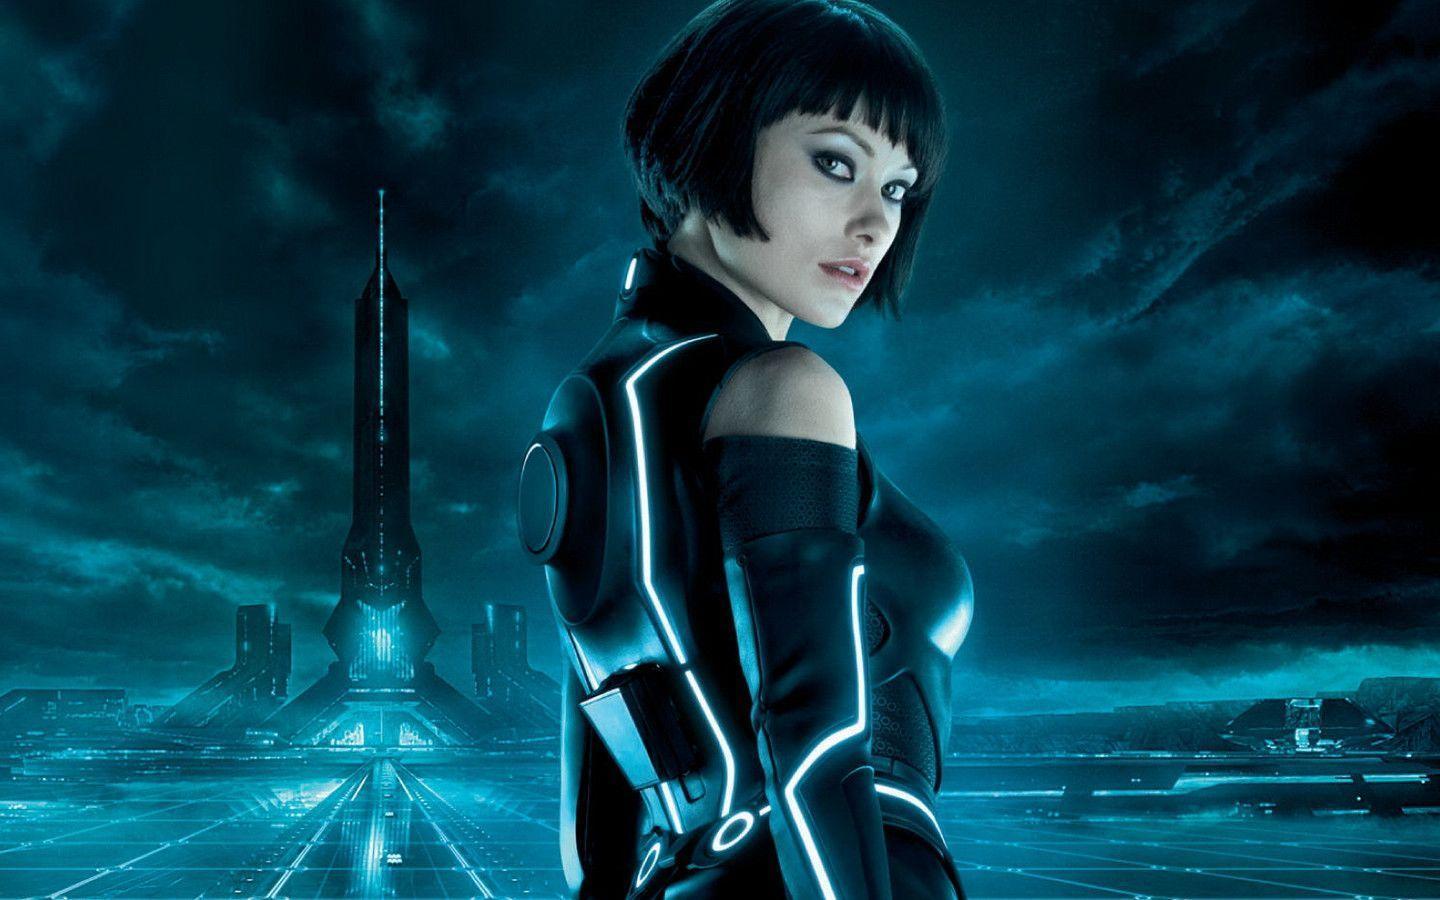 Tron Legacy Olivia Wilde Wallpaper Image & Picture